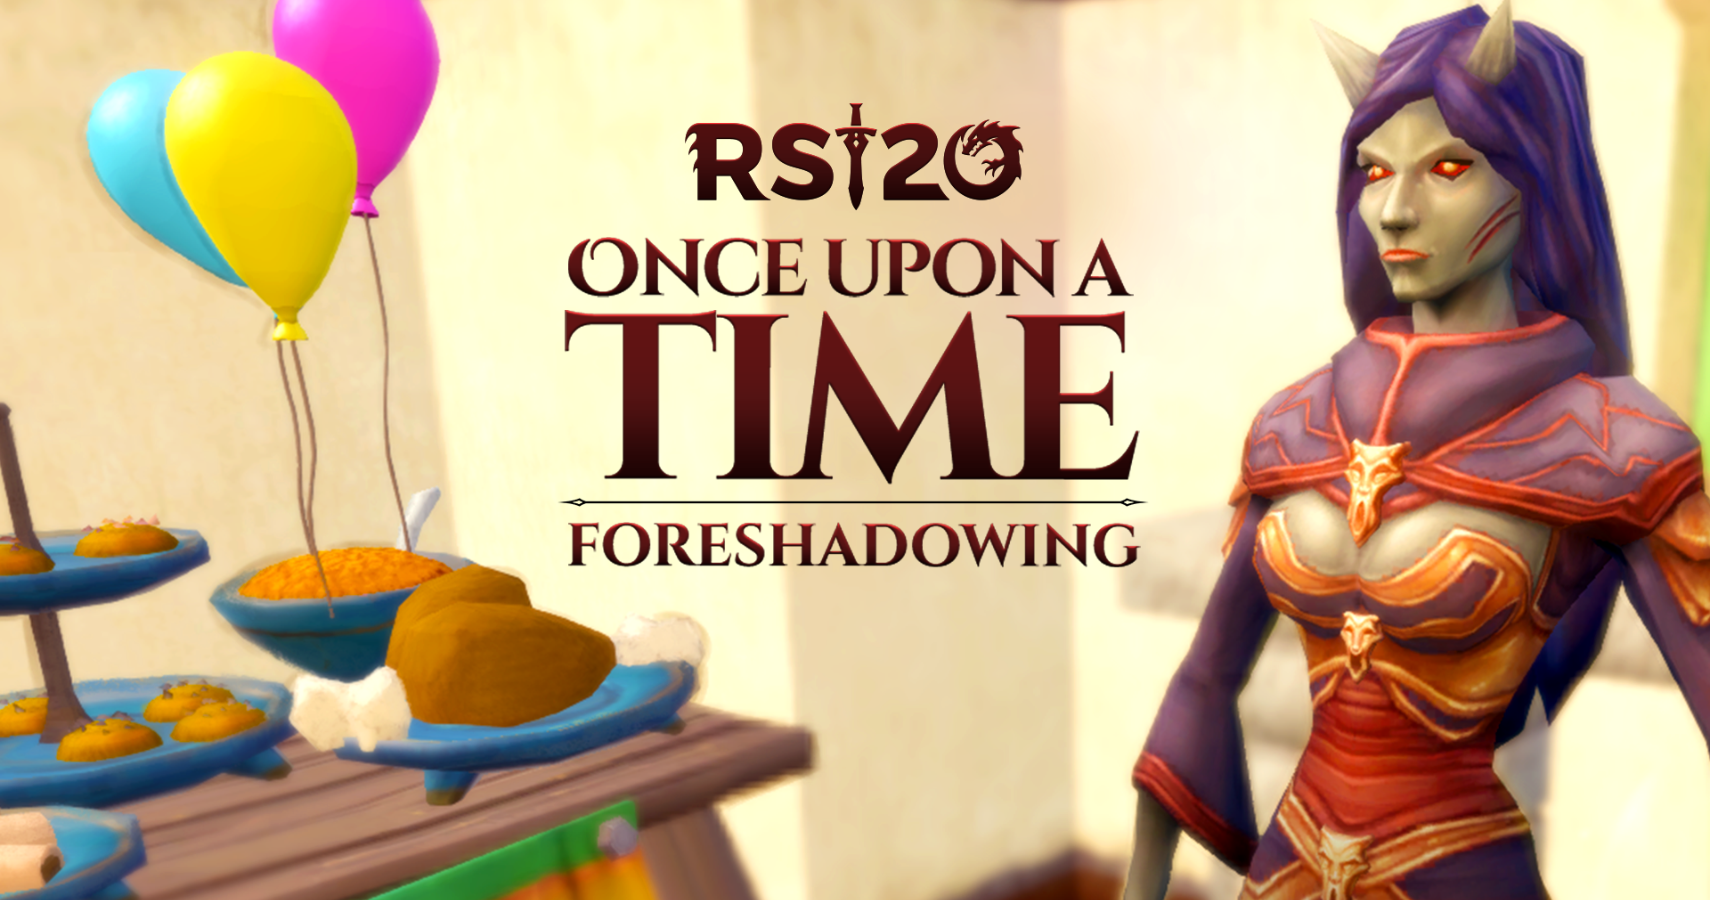 RuneScape\'s 20th Anniversary Fun The Miniquest With Celebration And Of Once Upon Skilling Continues A Time